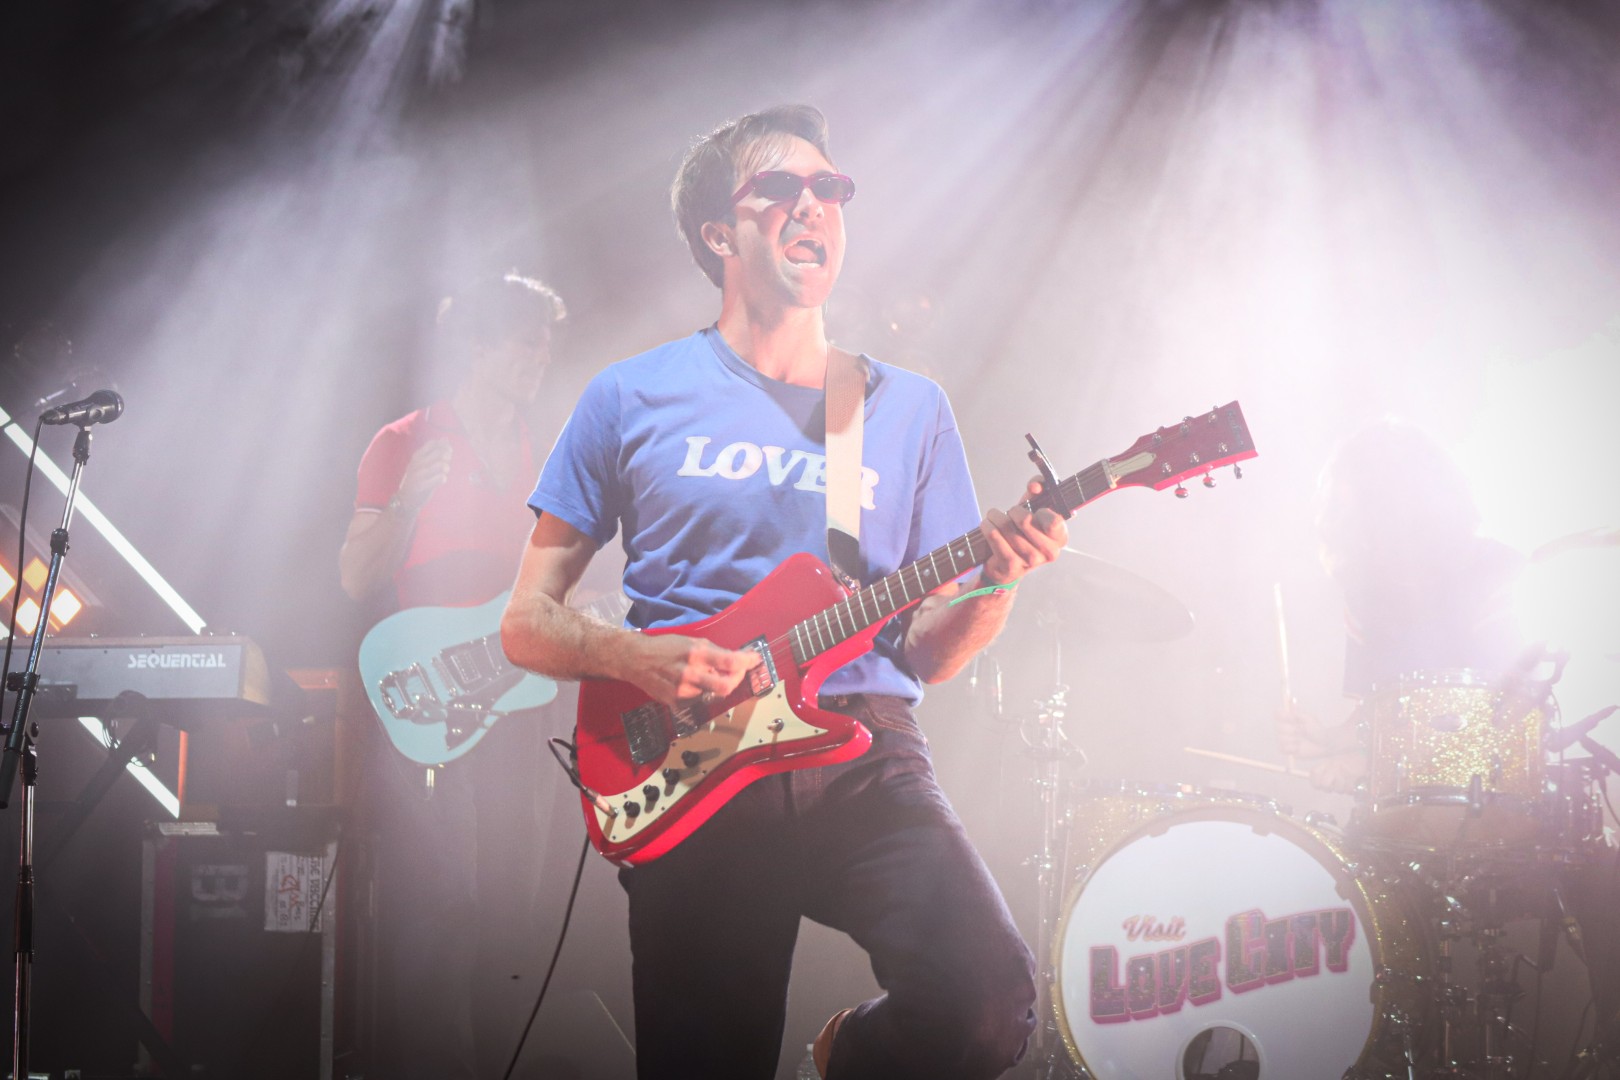 The Vaccines at Henham Park in Suffolk on July 25, 2021 (c11ee98b15)